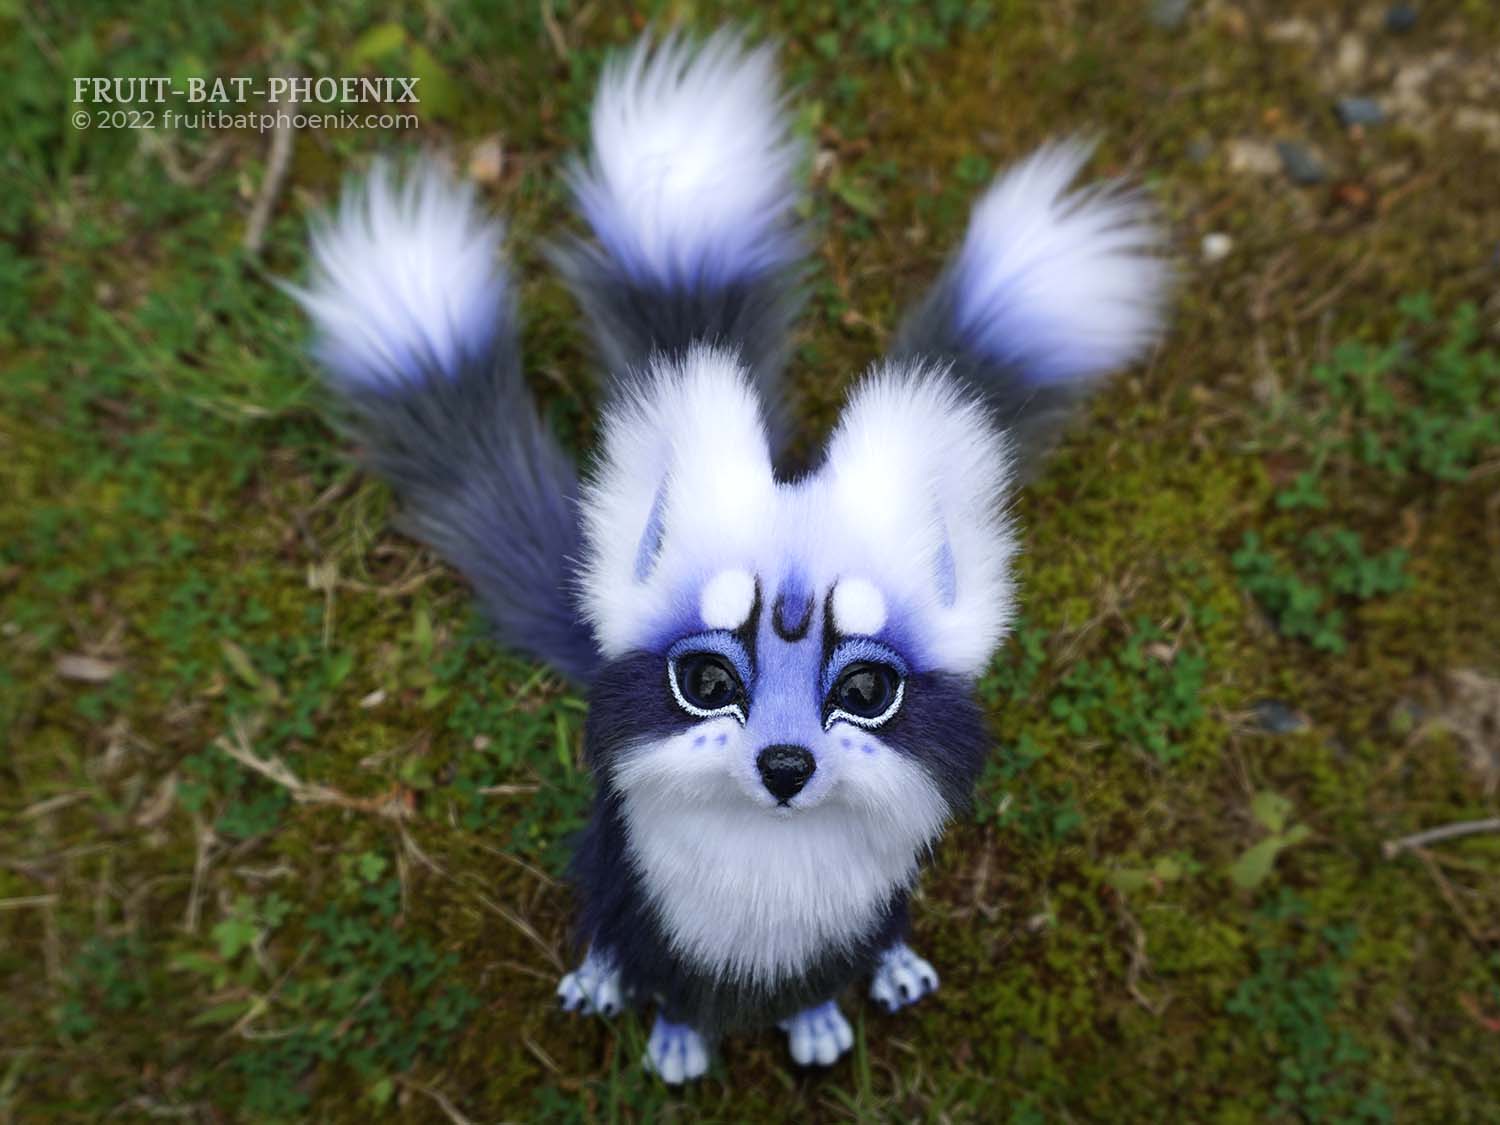 realistic cute fox/kitsune poseable artdoll with three tails sitting and looking up a the viewer